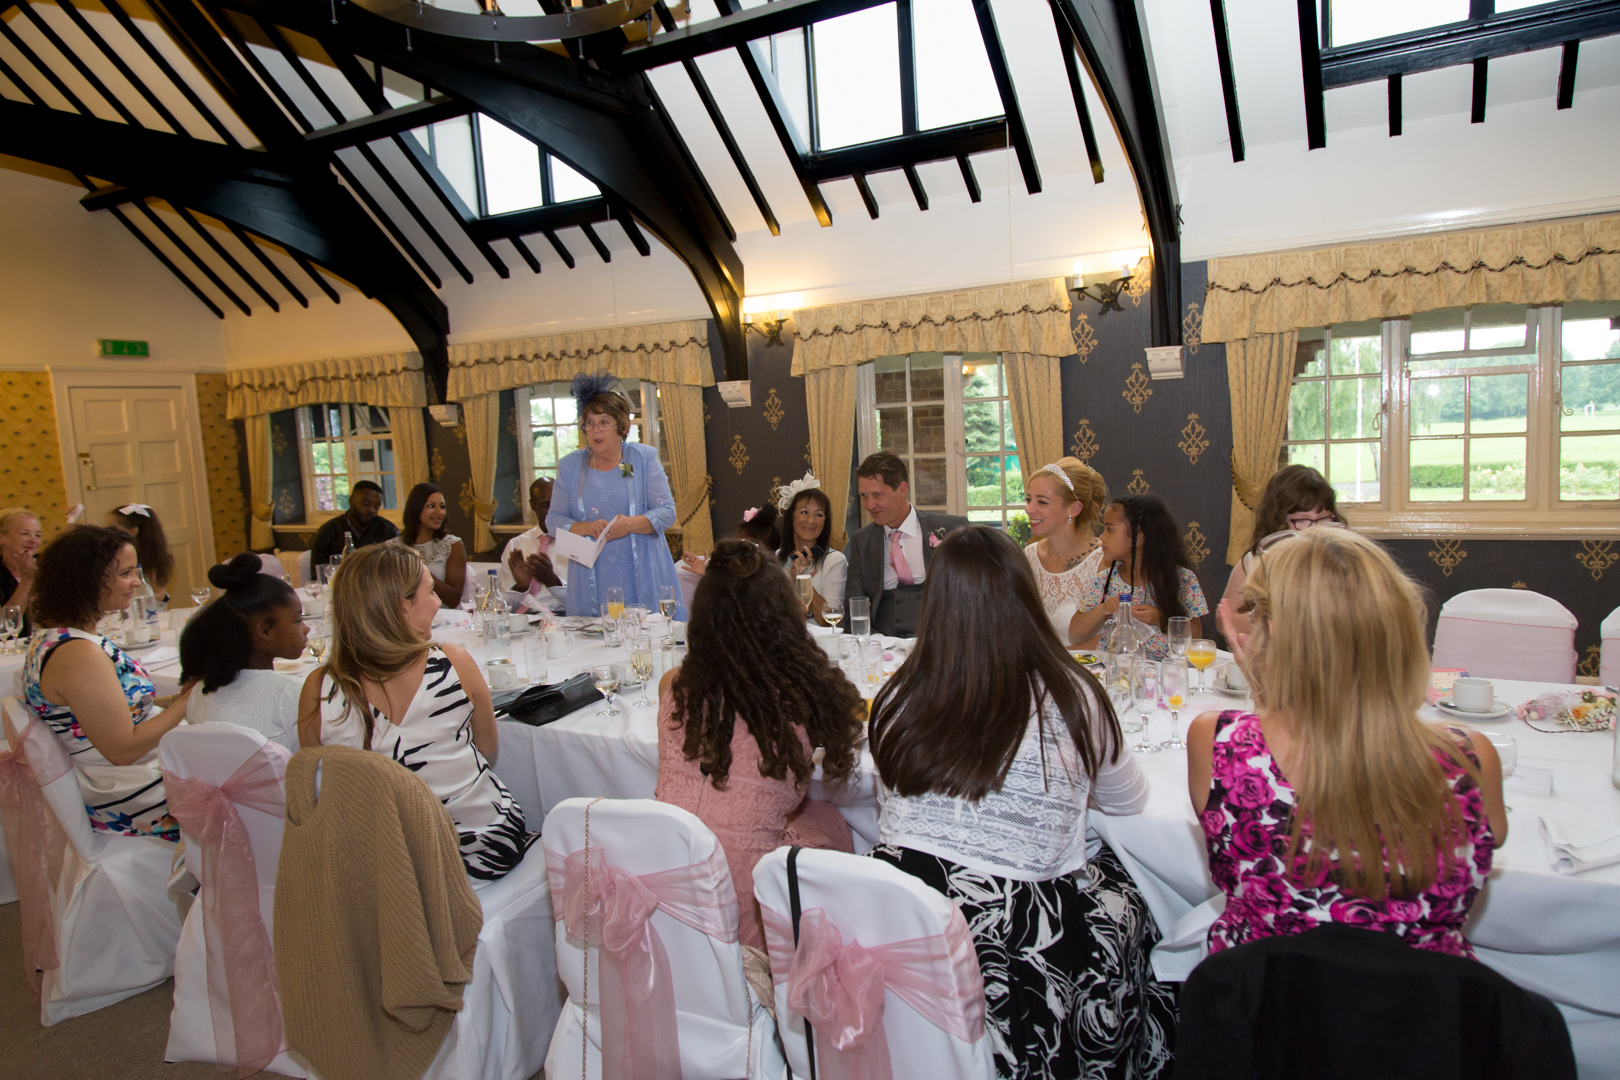 Speeches at the Wedding Breakfast - Paul and Diane at The Cavendish in Eastcote, Middlesex by Tim Durham at Pinner Wedding Photography. Photographer in Harrow and photographer in Ruislip